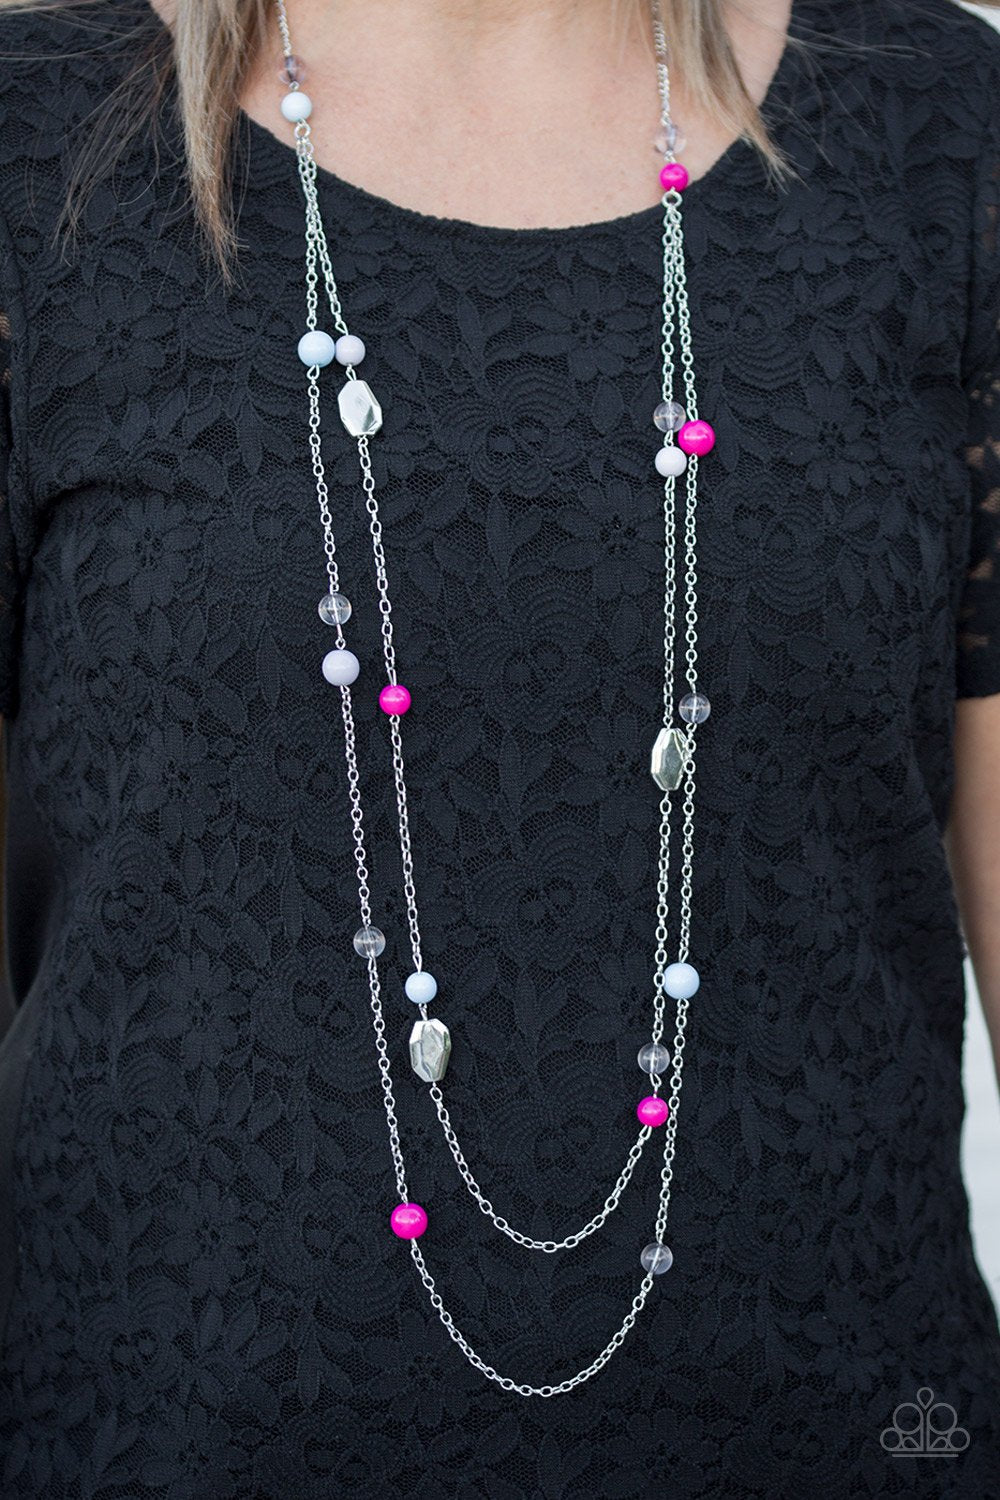 Take One For the GLEAM - multi - Paparazzi necklace